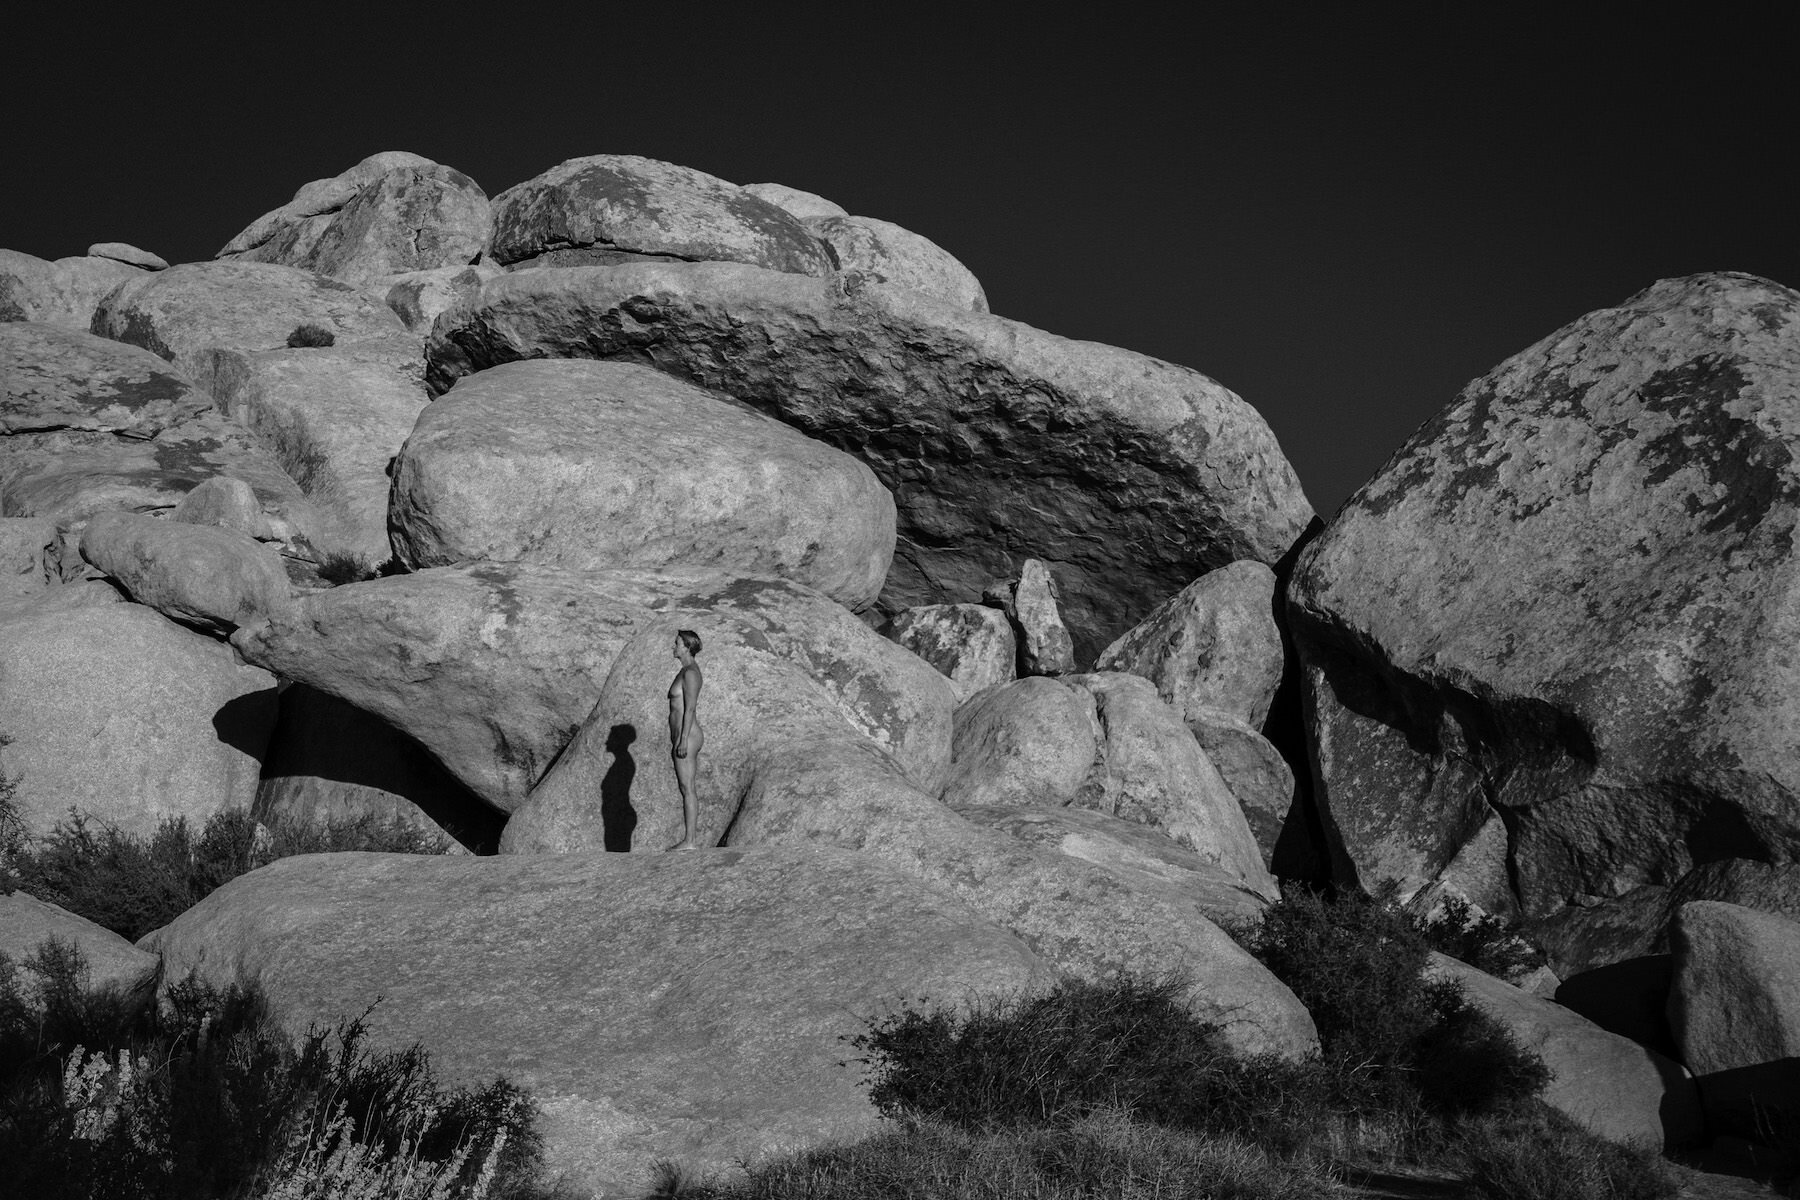 Bolder with Boulders (BW)